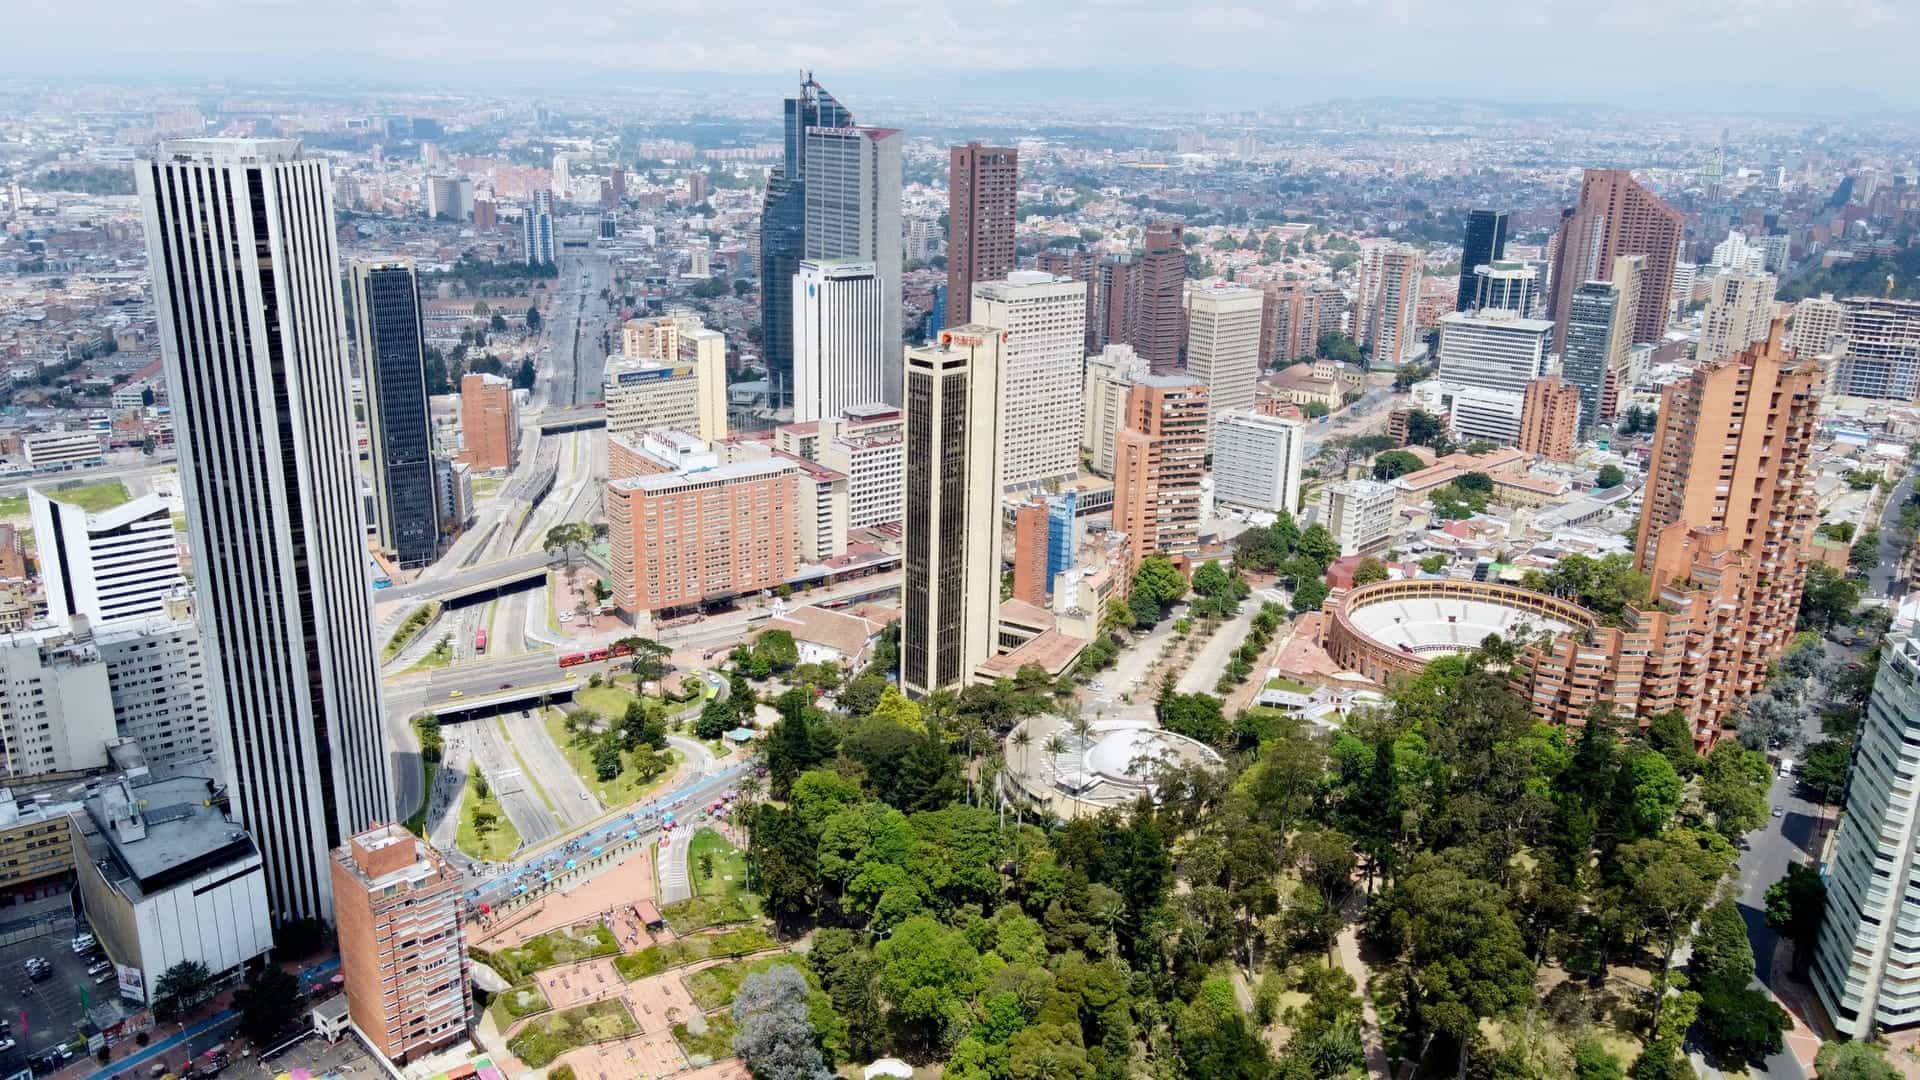 Aerial photograph of Bogota, Colombia.